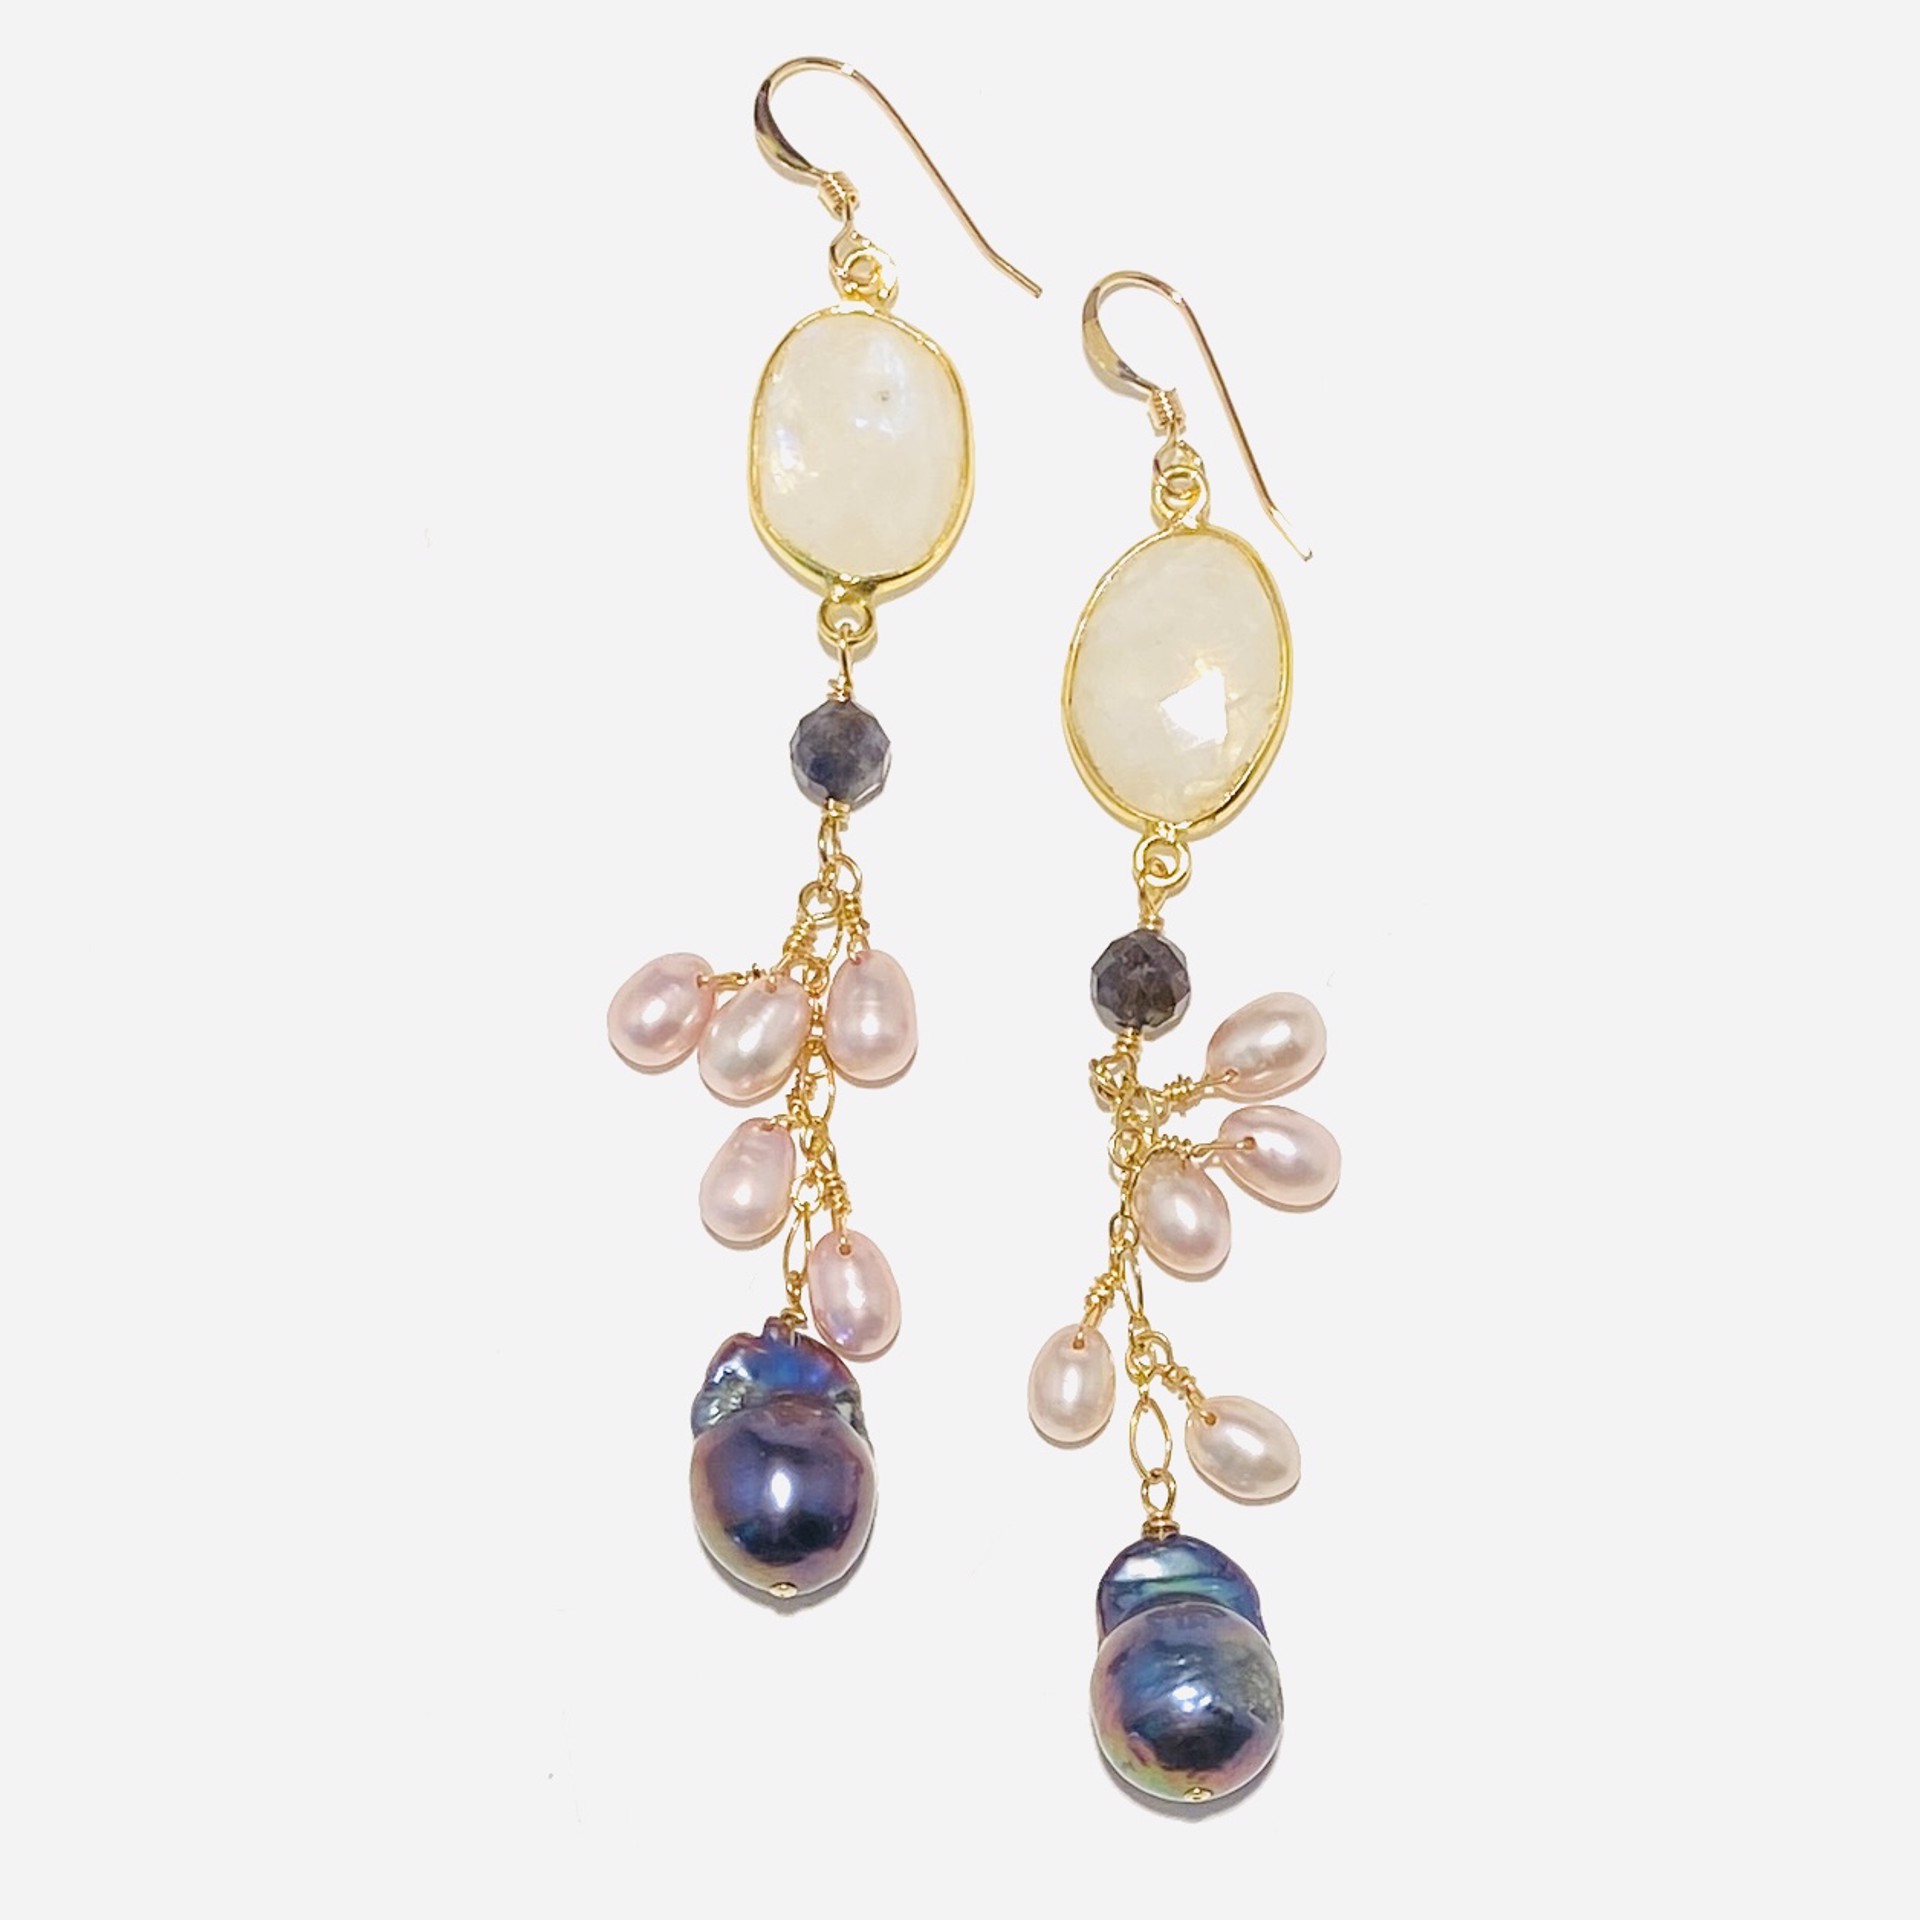 Baroque Peacock Pearl, Moonstone, Pink Pearl, Sapphire GF Earrings LR23-12 by Legare Riano